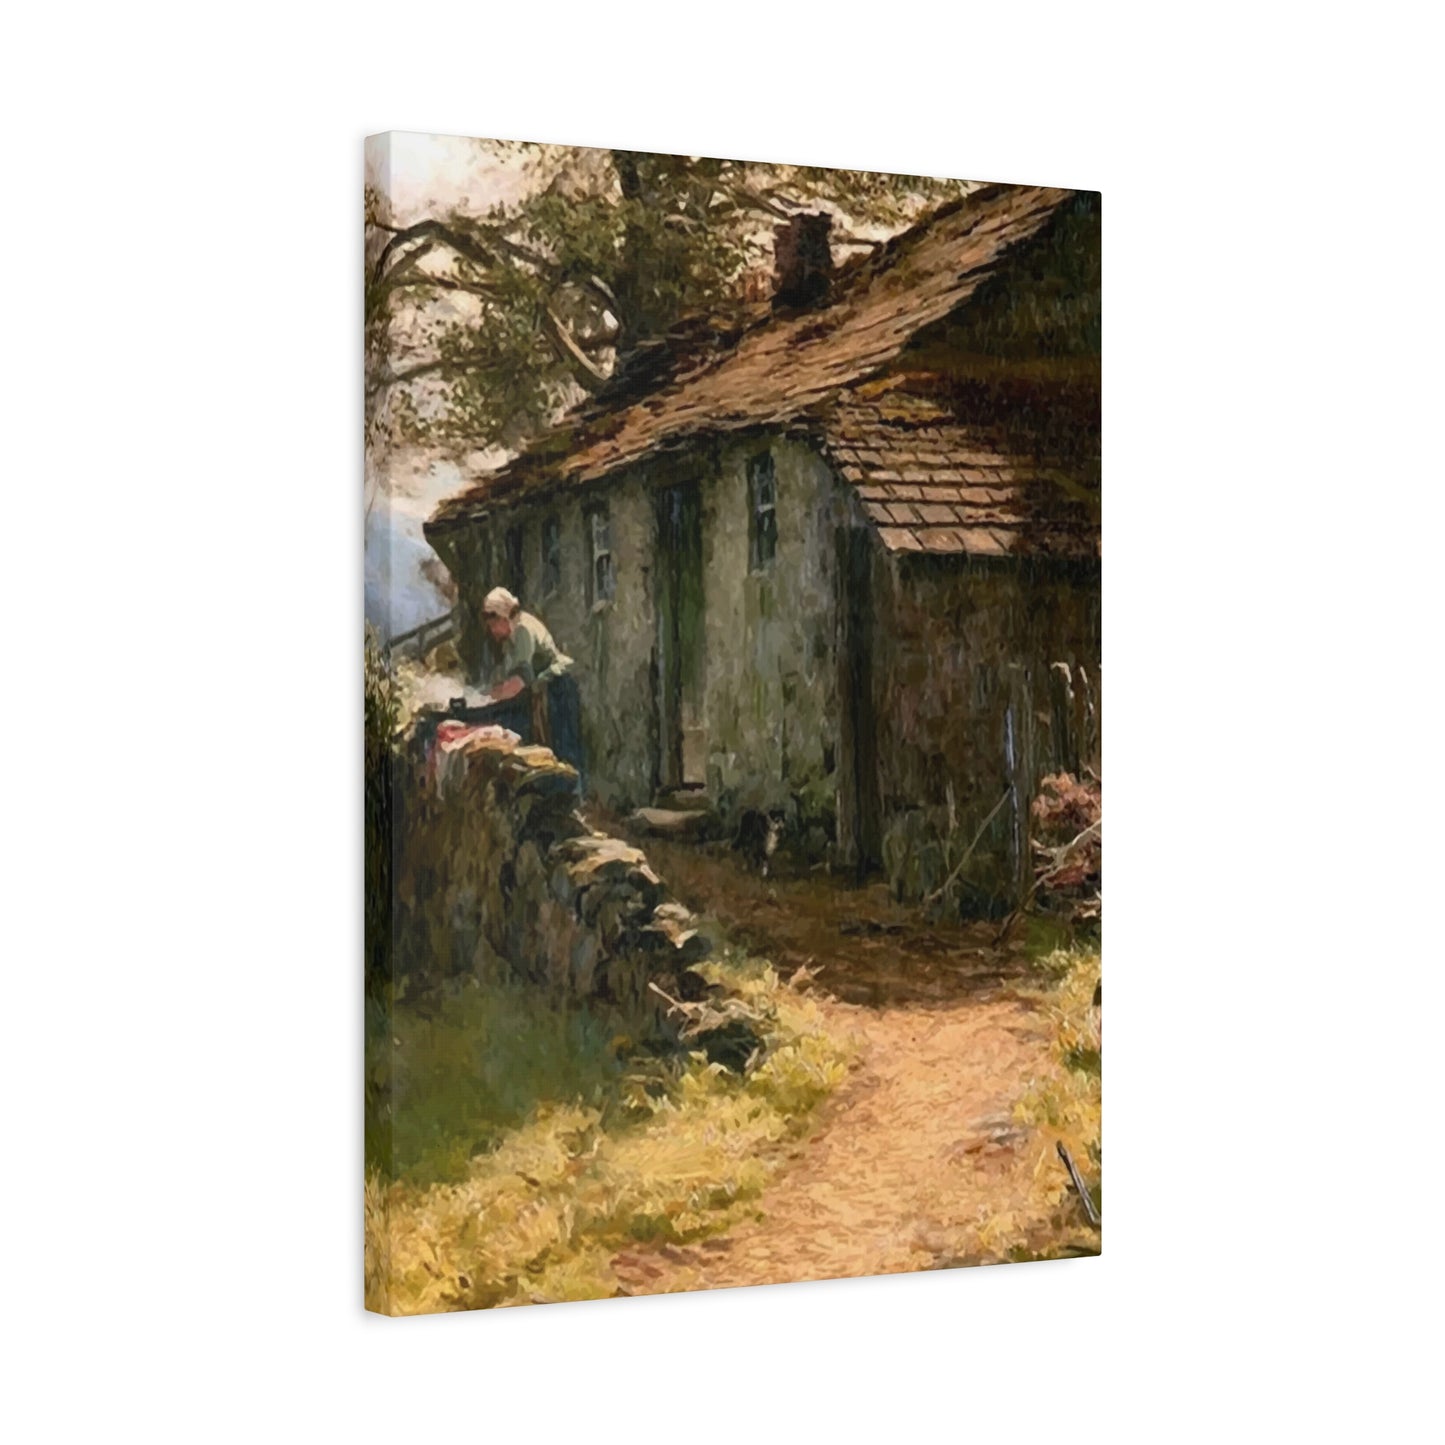 Countryside Wall Art & Canvas Prints